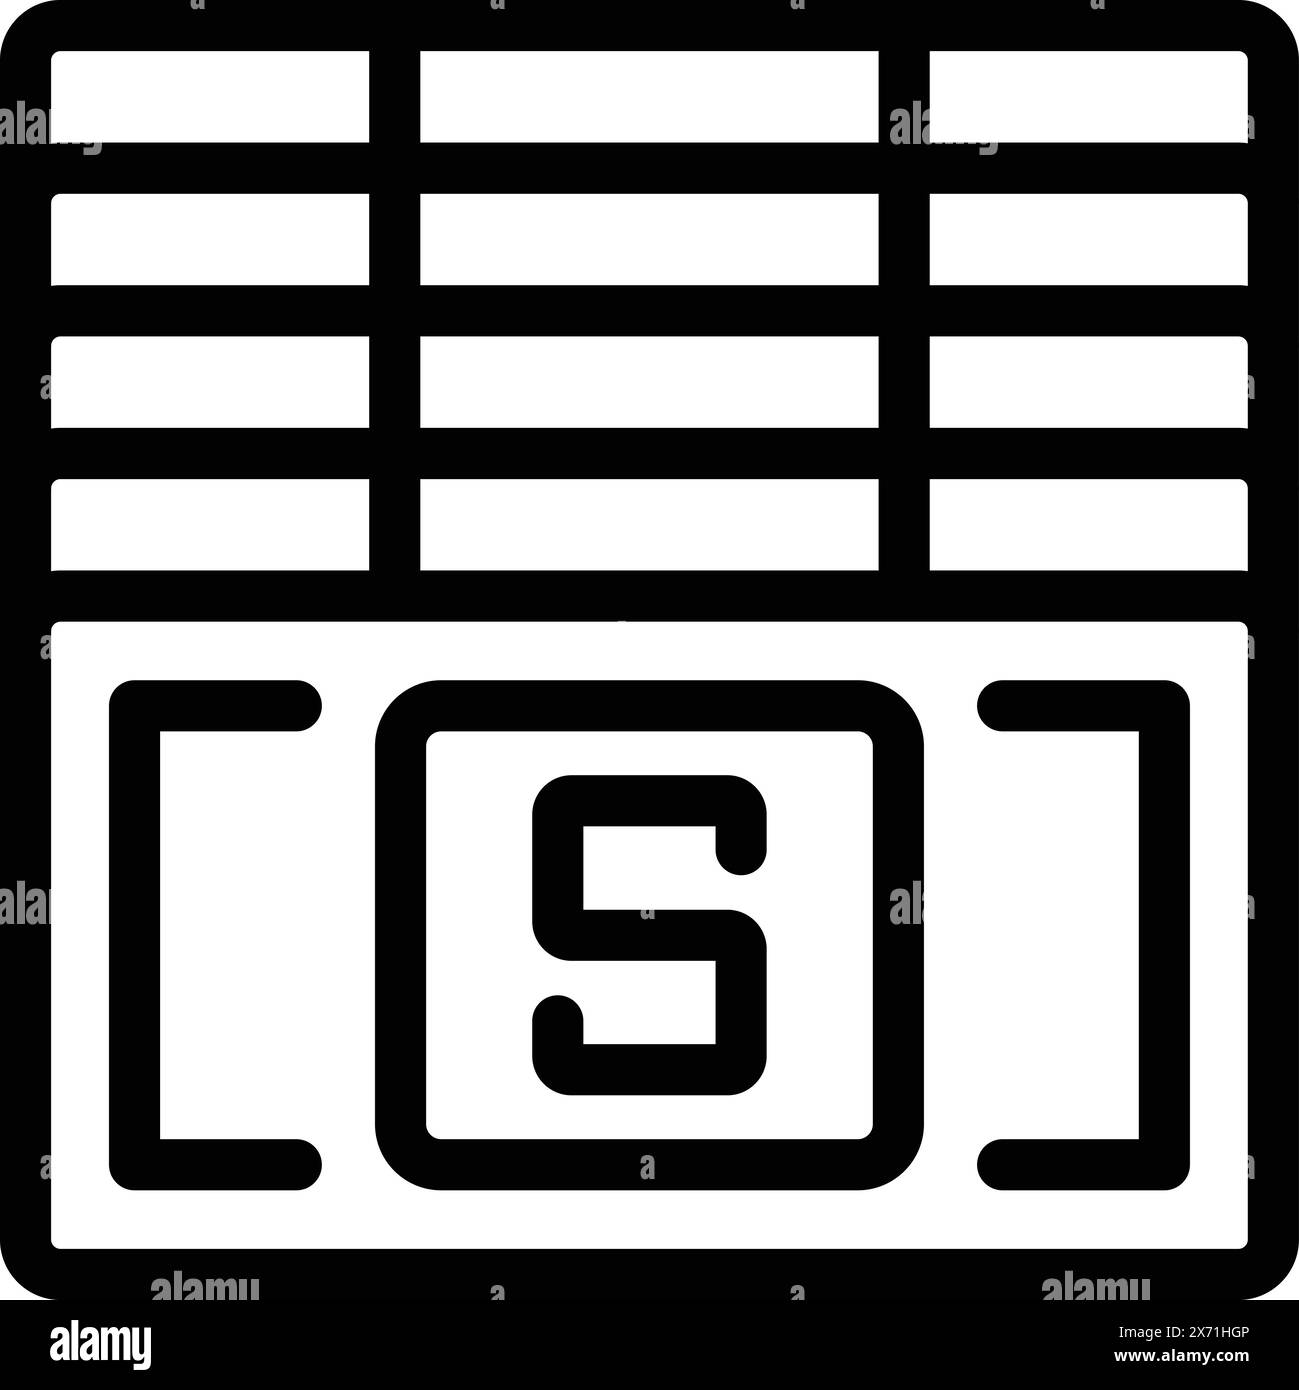 Simplified vector illustration of a calendar icon, depicted in black and white with a bold letter s on it Stock Vector